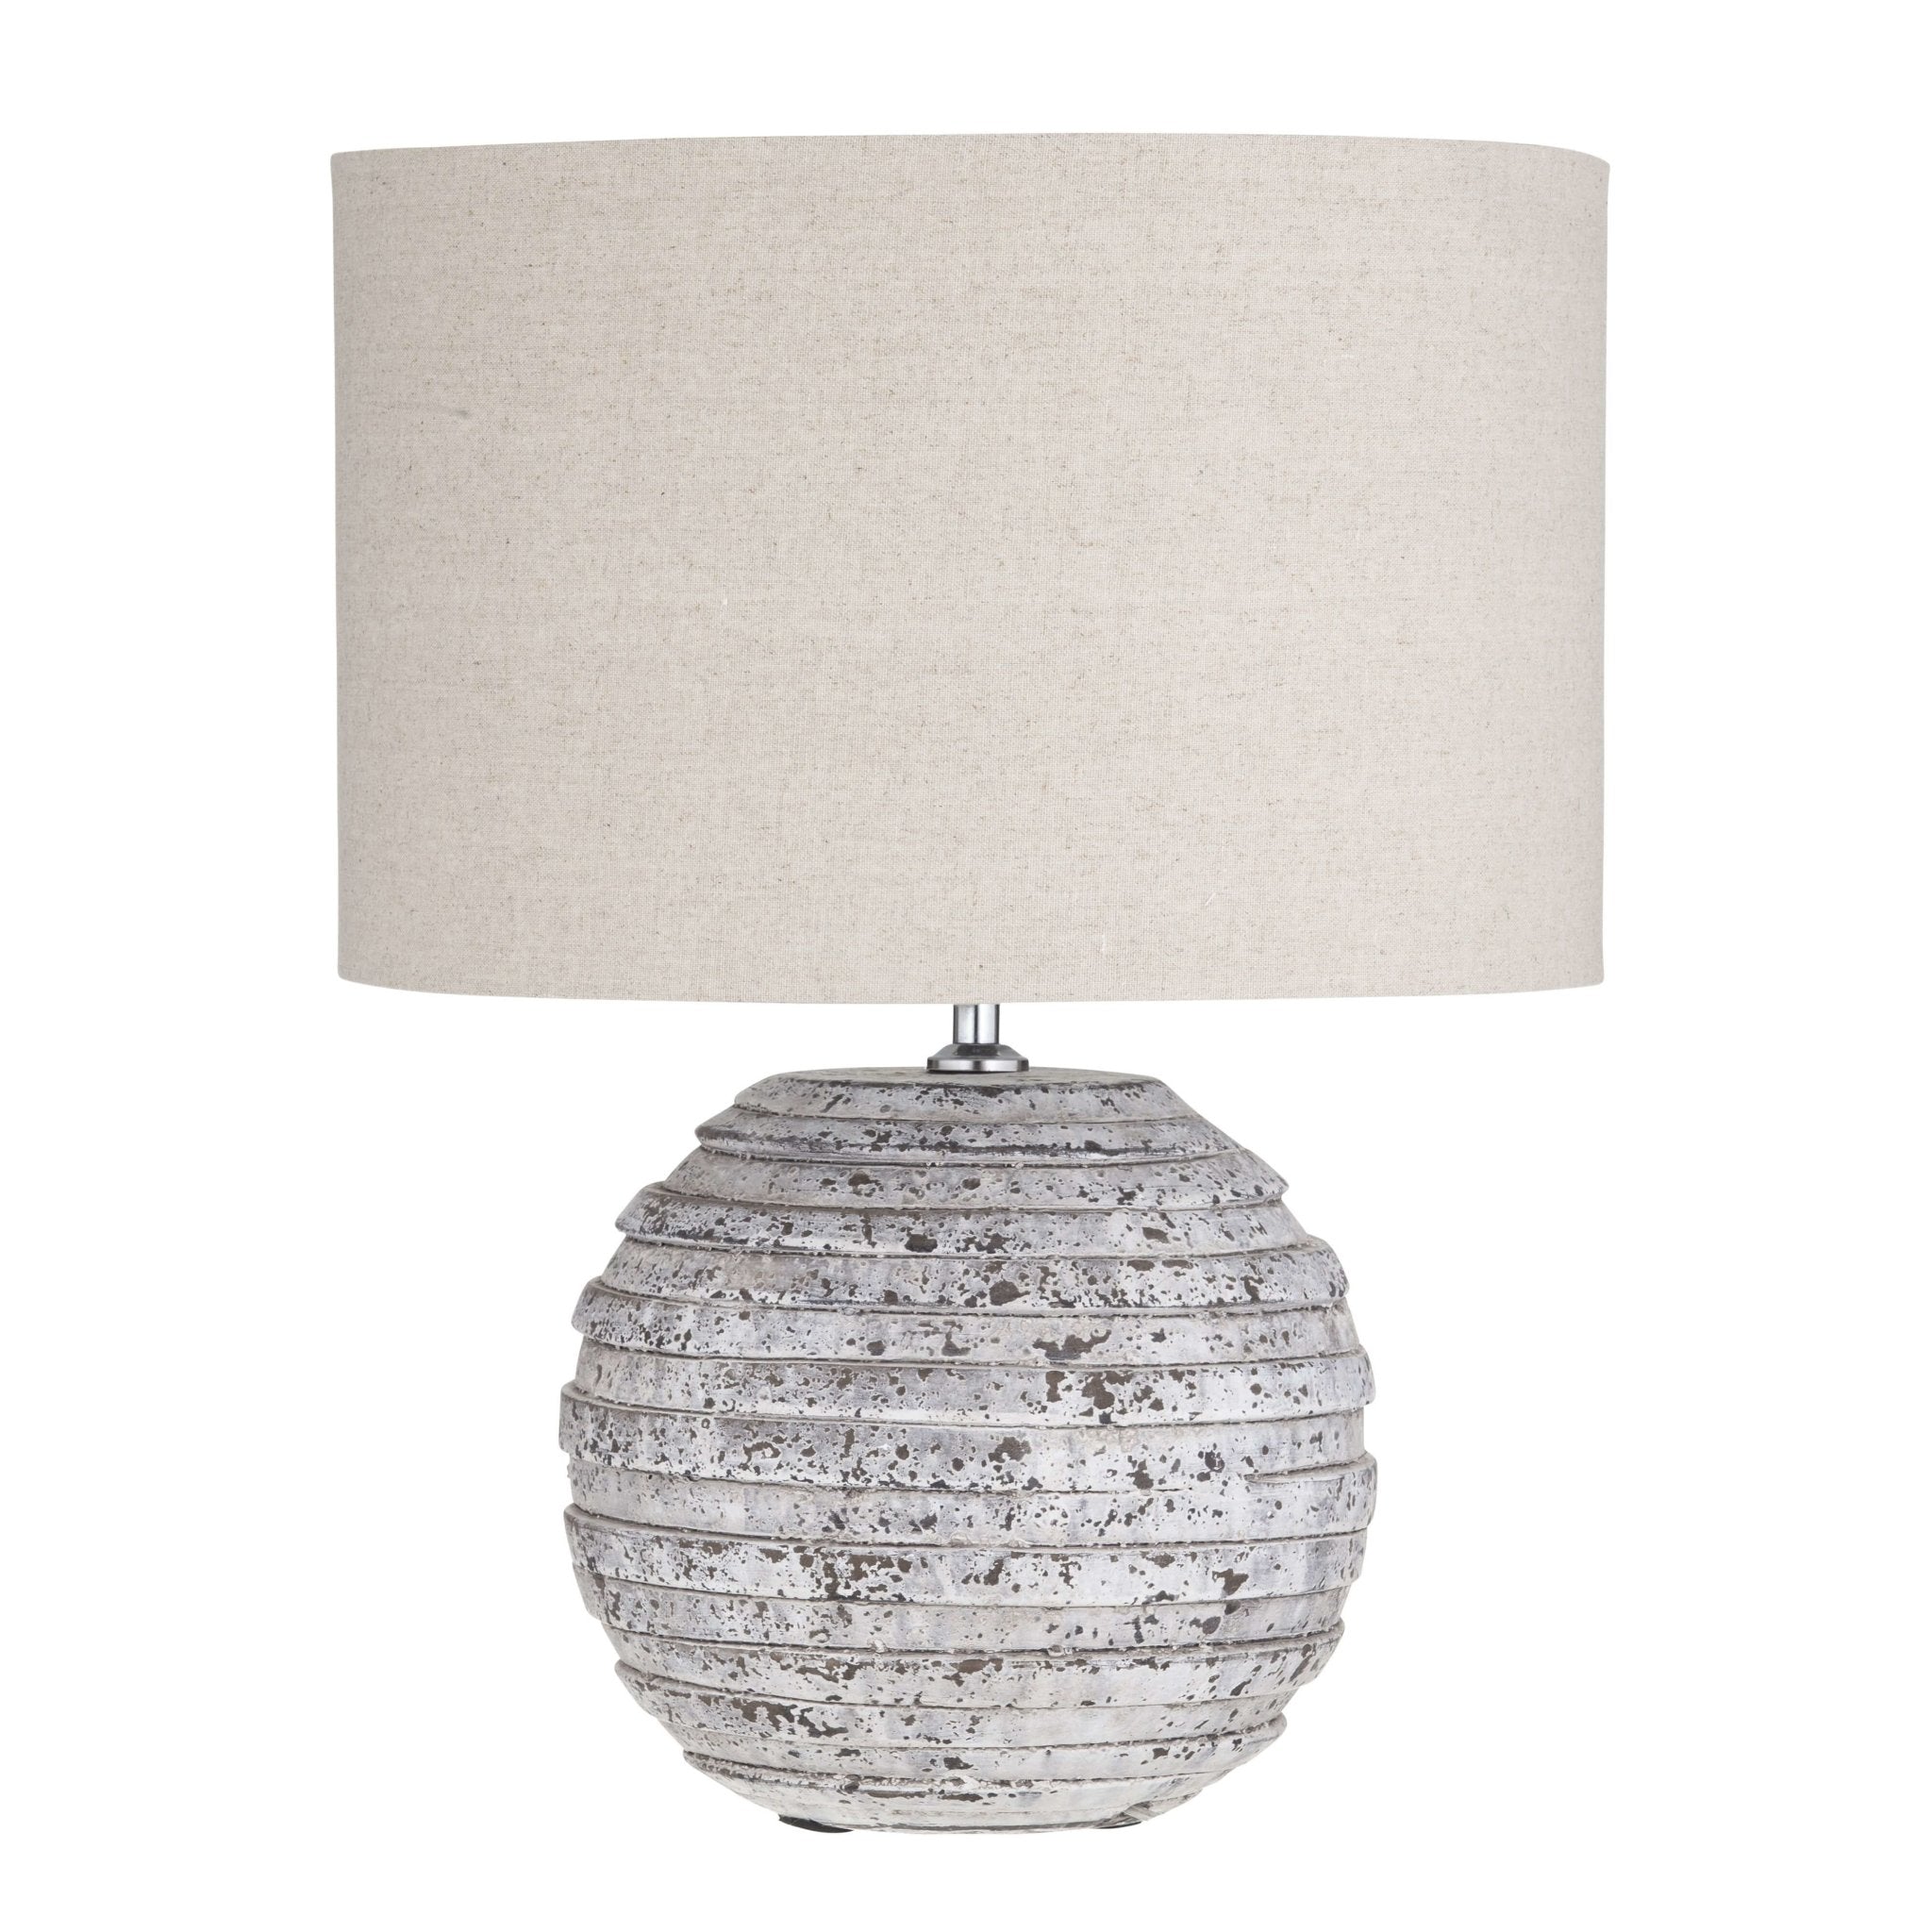 Domain Large Table Lamp or Bedside Lamp Grey Concrete Look Round Base Natural Linen Shade